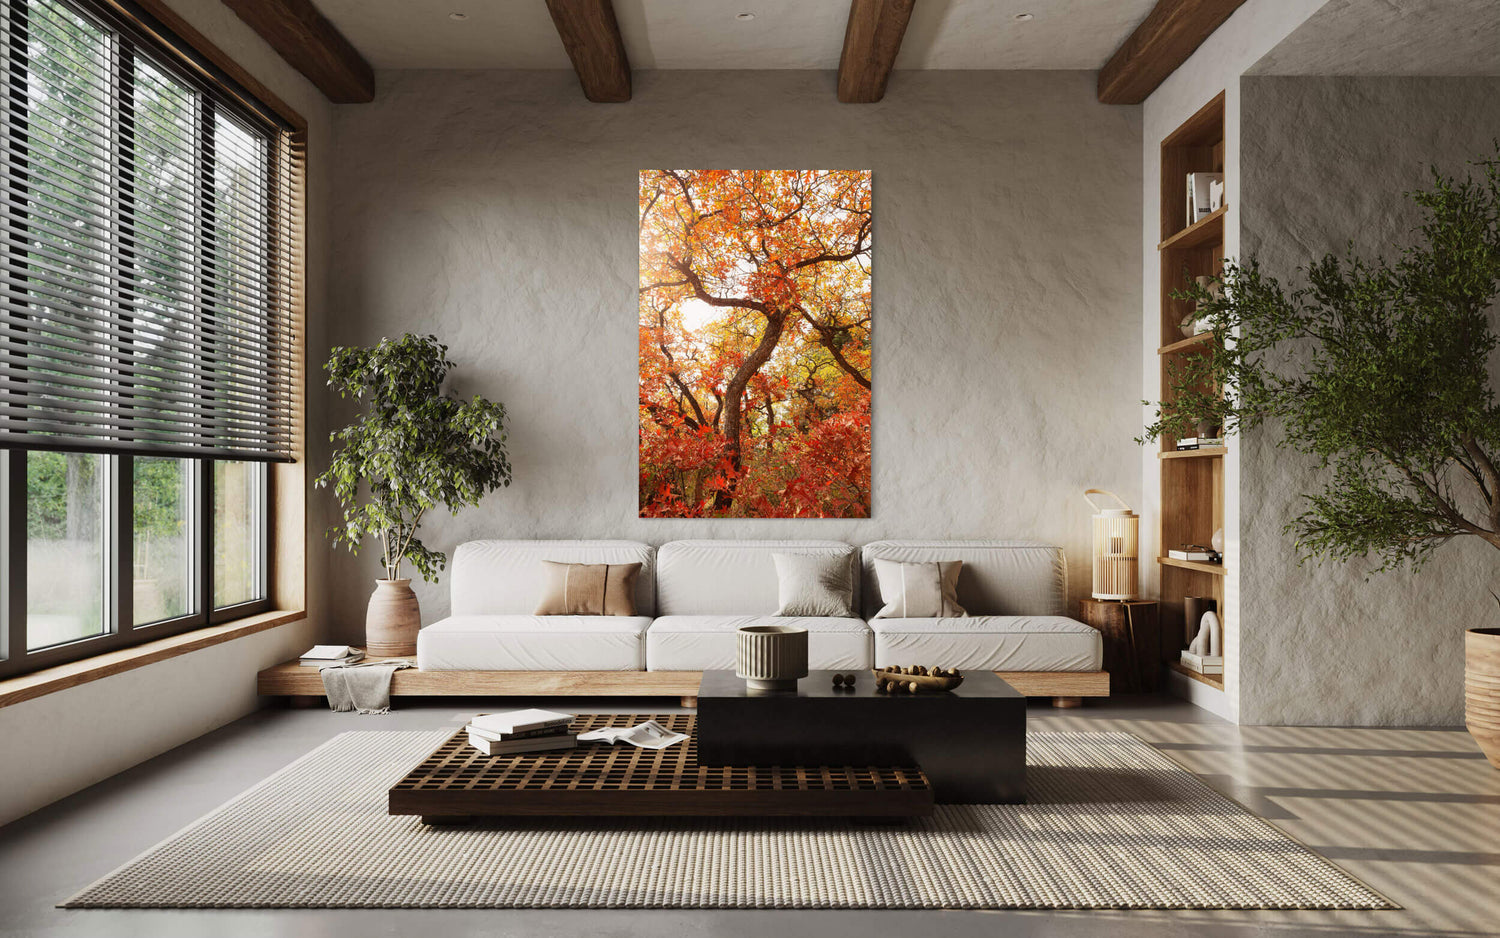 A piece of Colorado art showing the beautiful Ouray fall colors hangs in a living room.